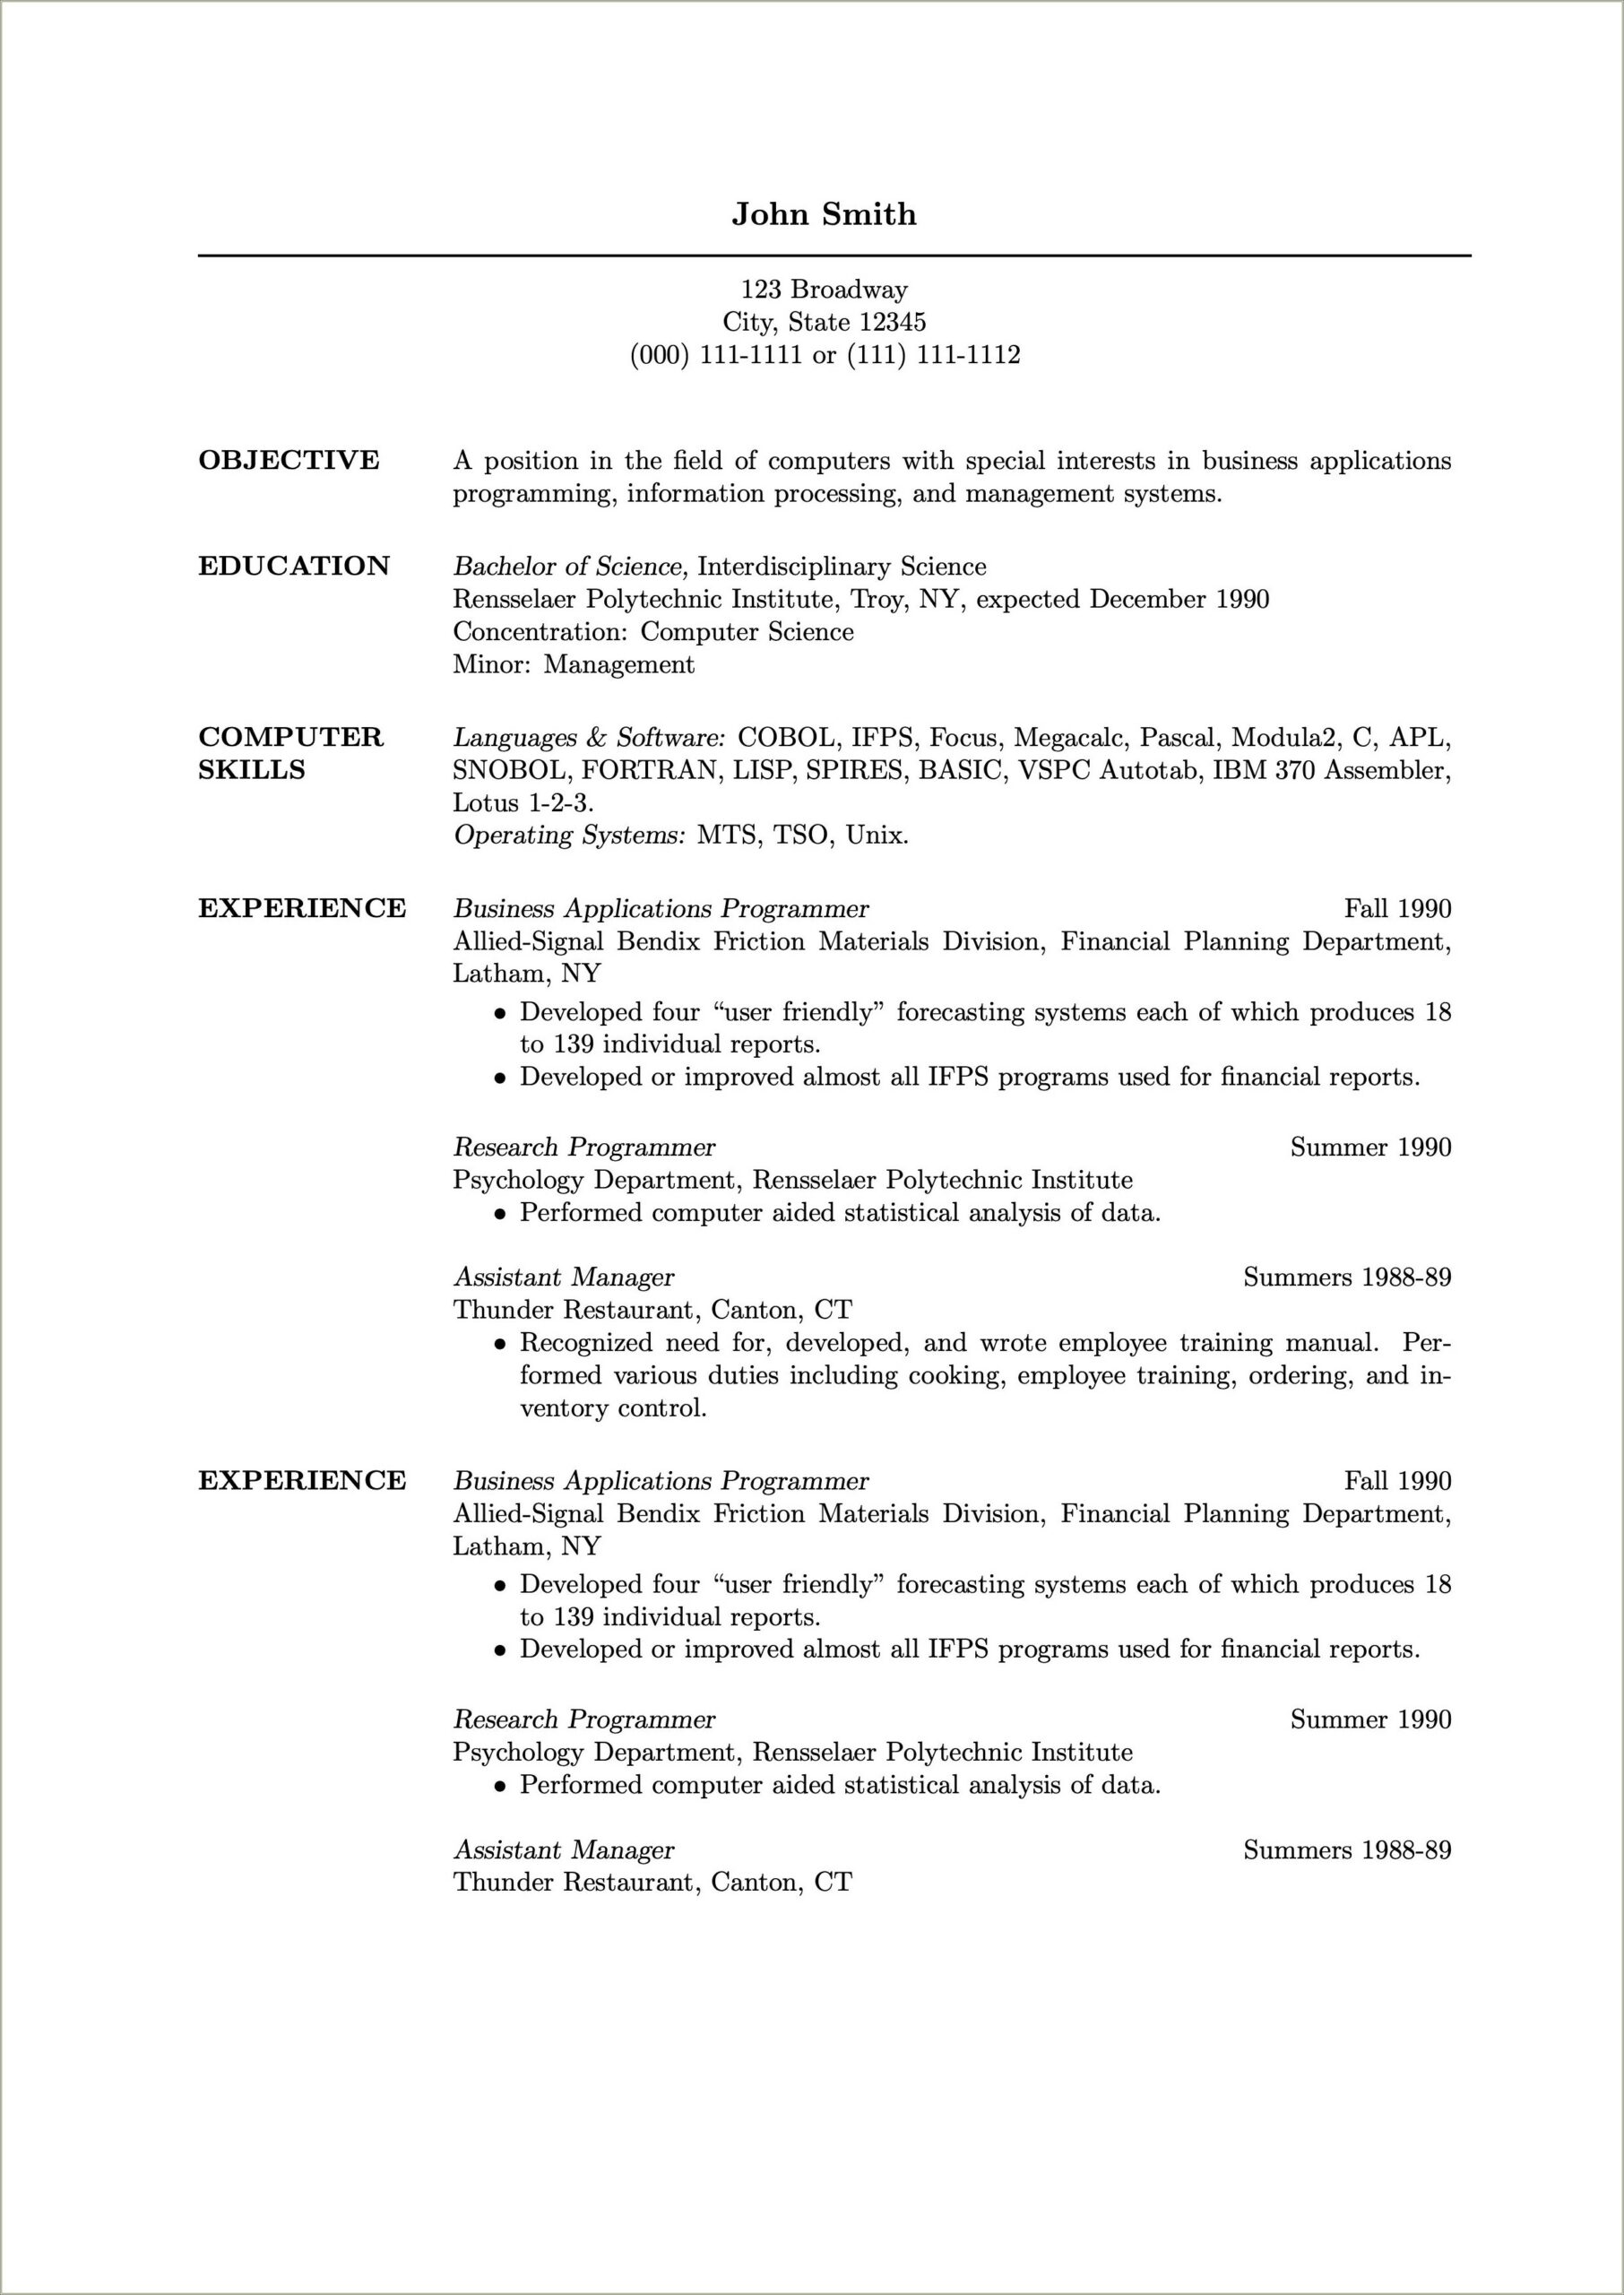 Resume Sample For Fresh Graduate Without Experience